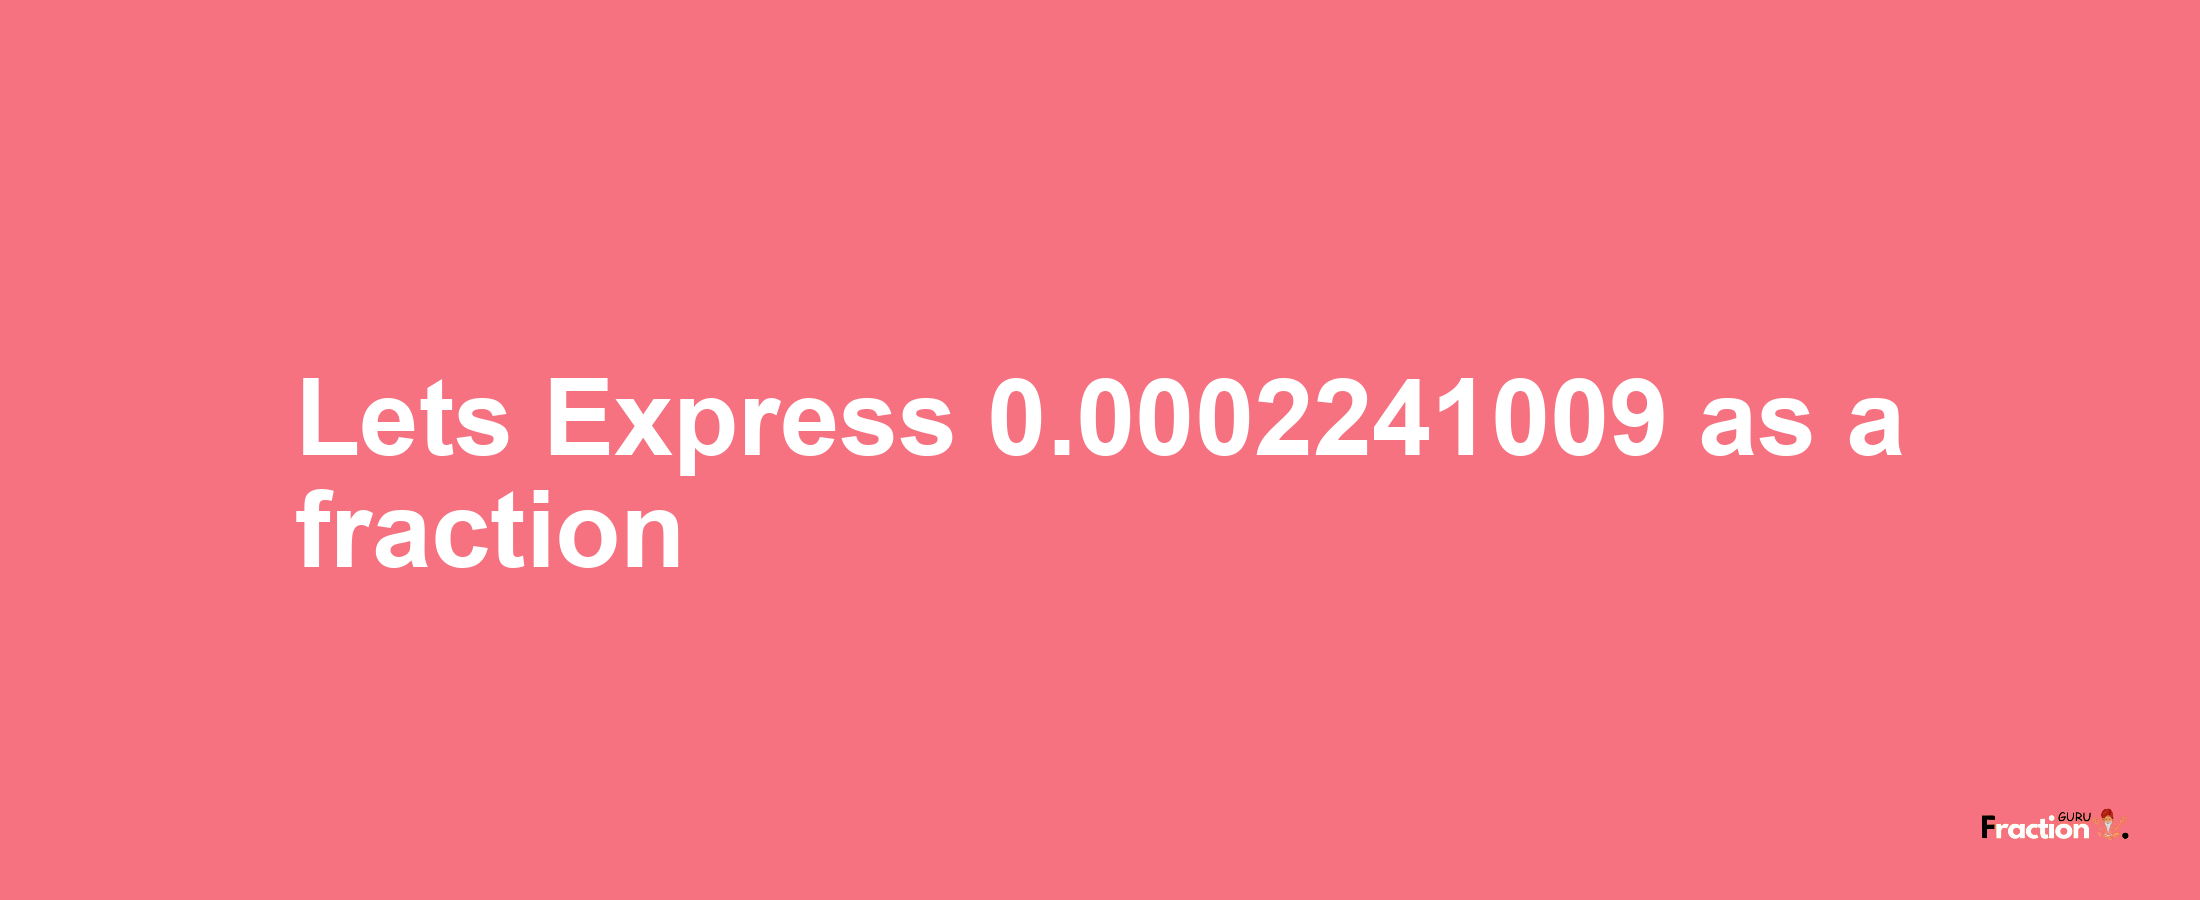 Lets Express 0.0002241009 as afraction